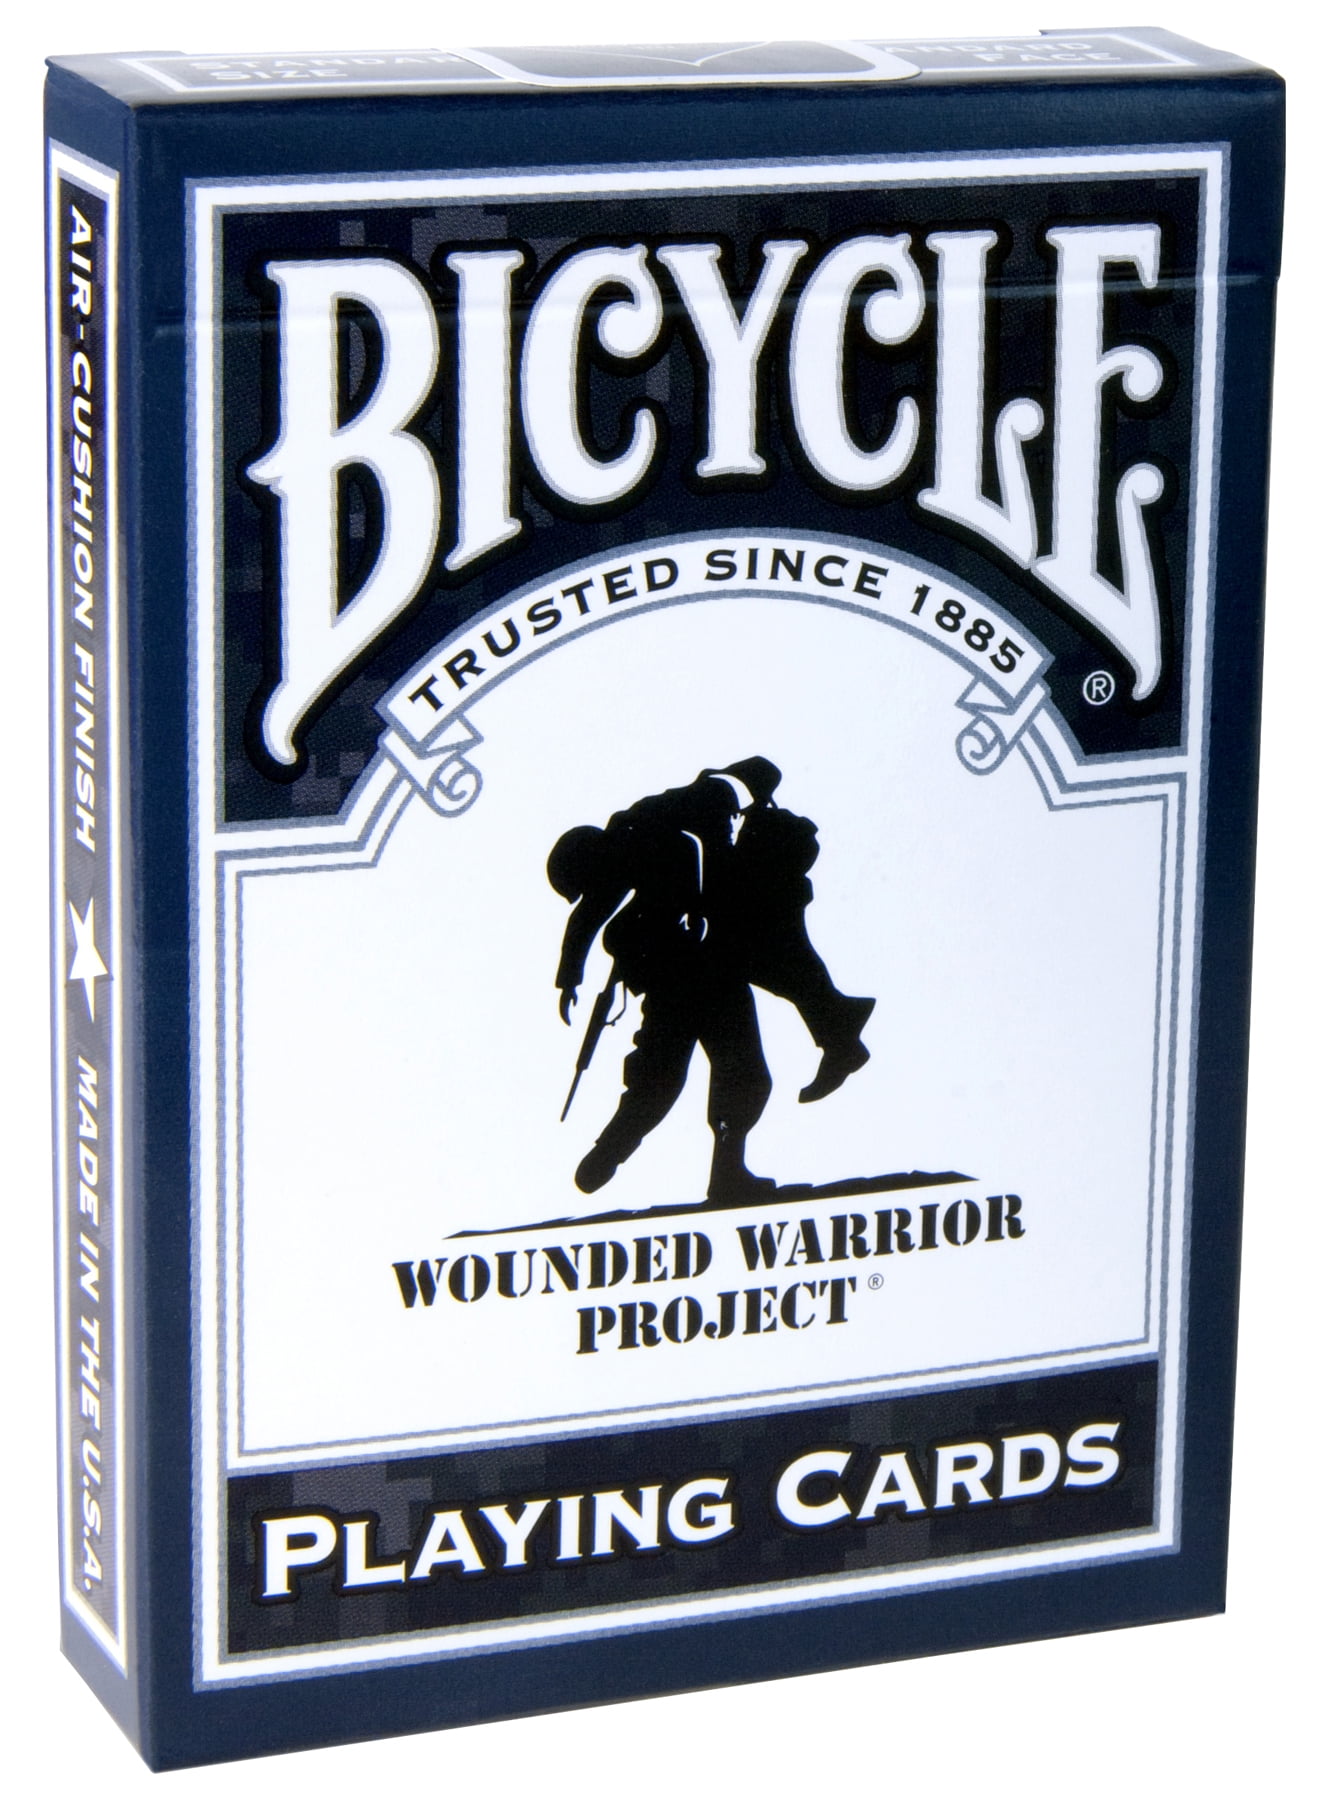 4 Pack Value Deal Bicycle Wounded Warrior Playing Cards Made in The USA